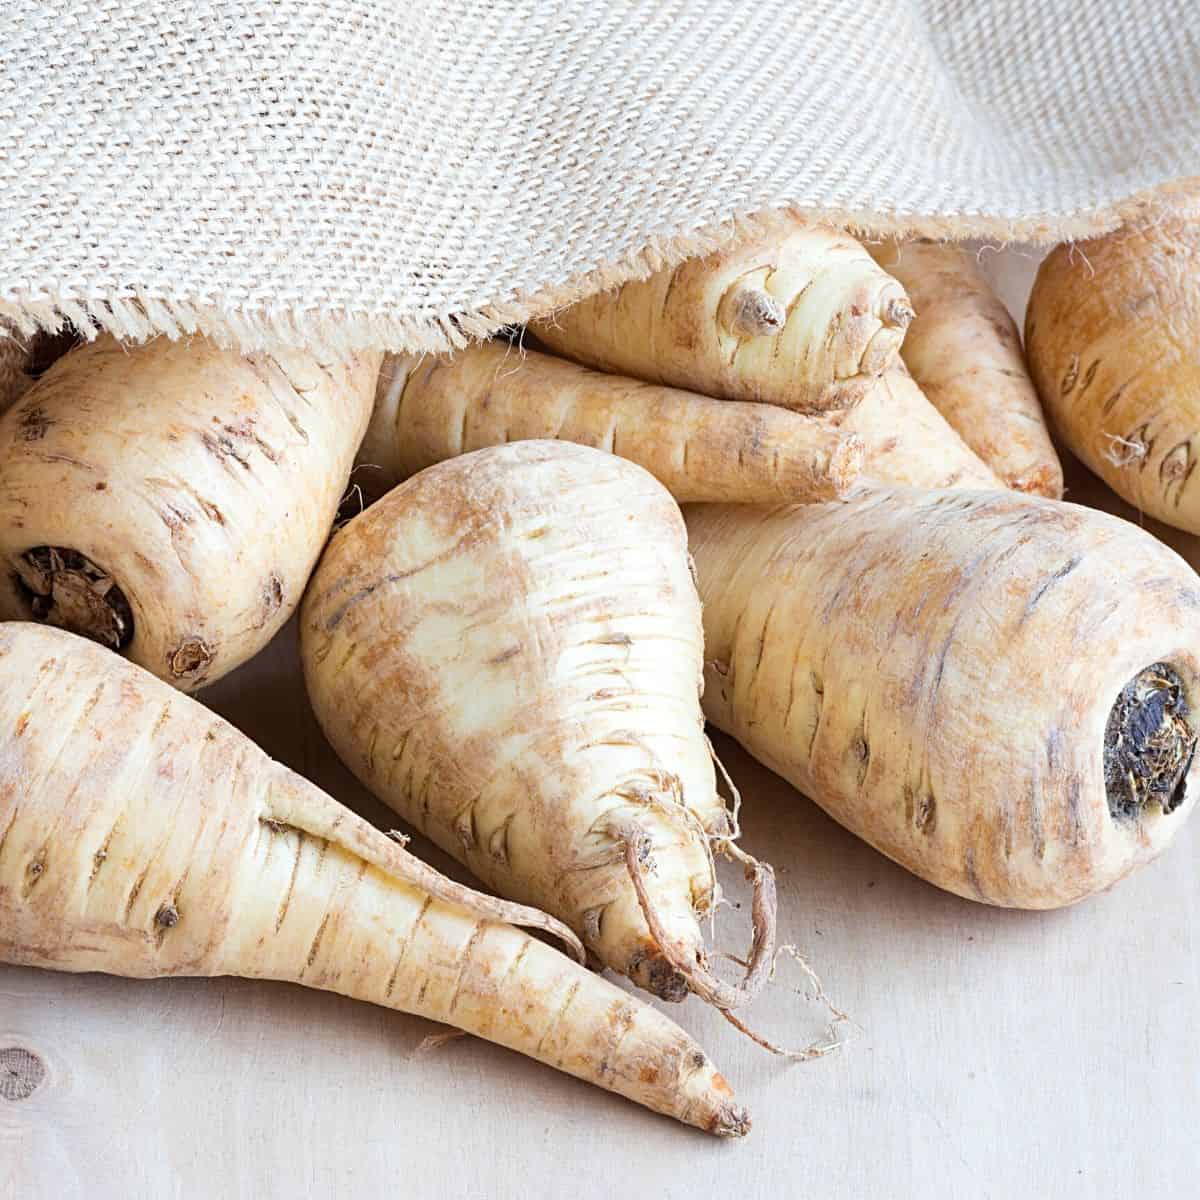 parsnips under a towel - Are Parsnips Keto? How to eat them on Keto.